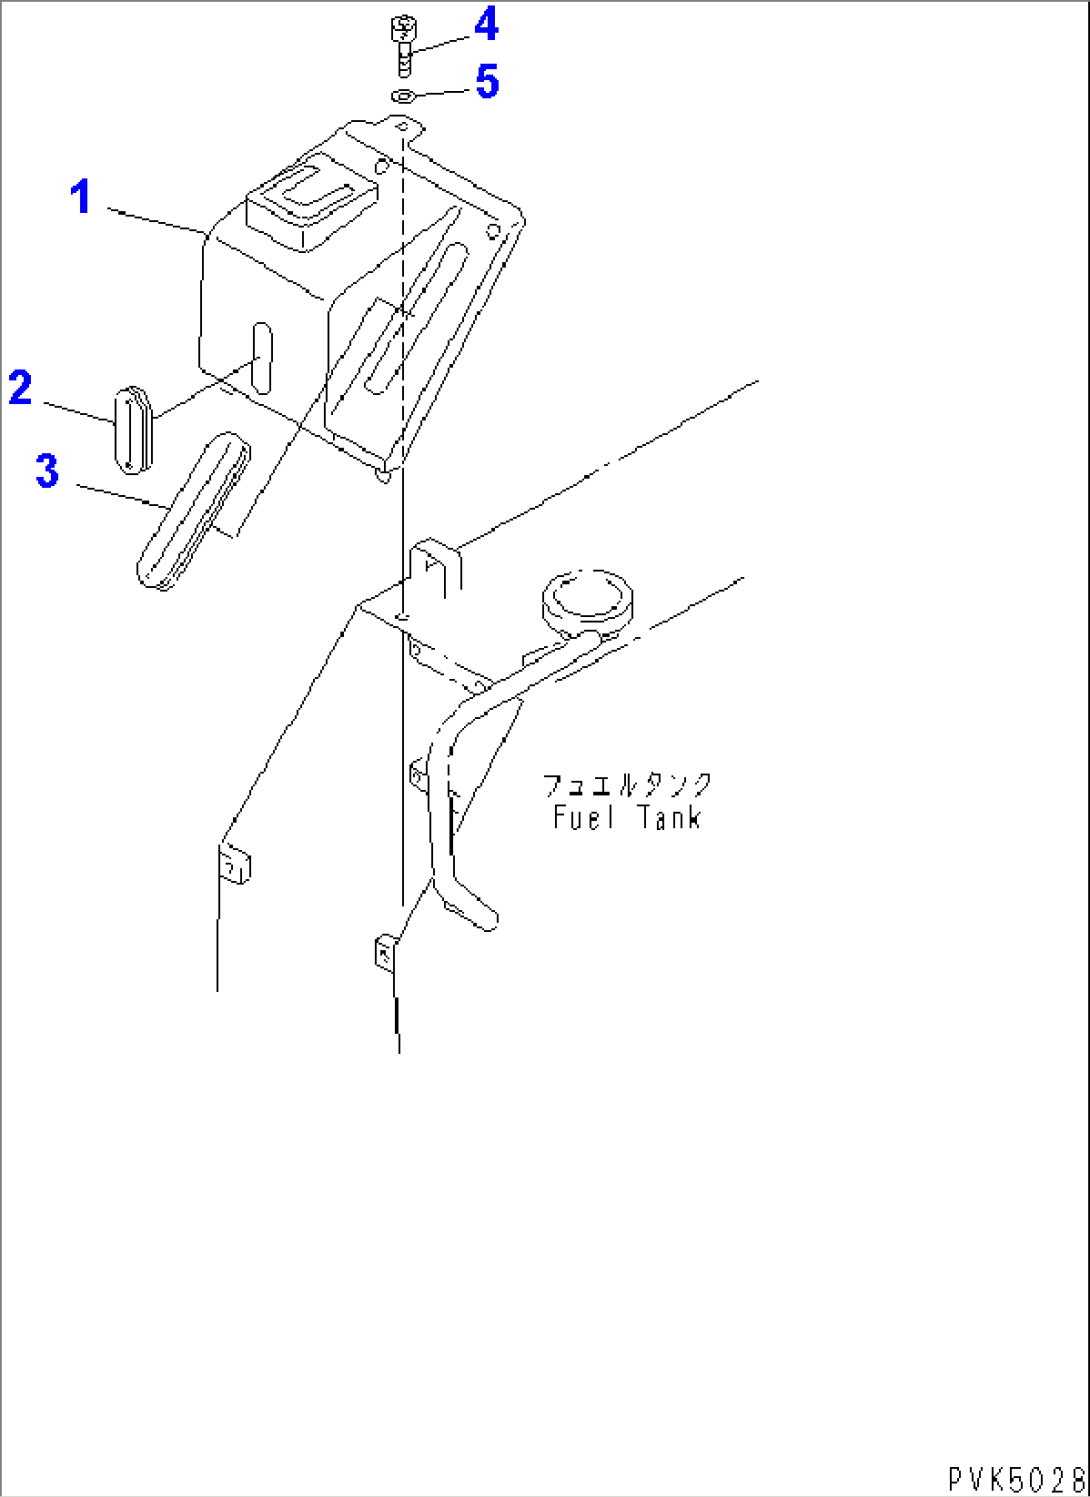 FUEL GUIDE (FOR 2 LEVERS STEERING)